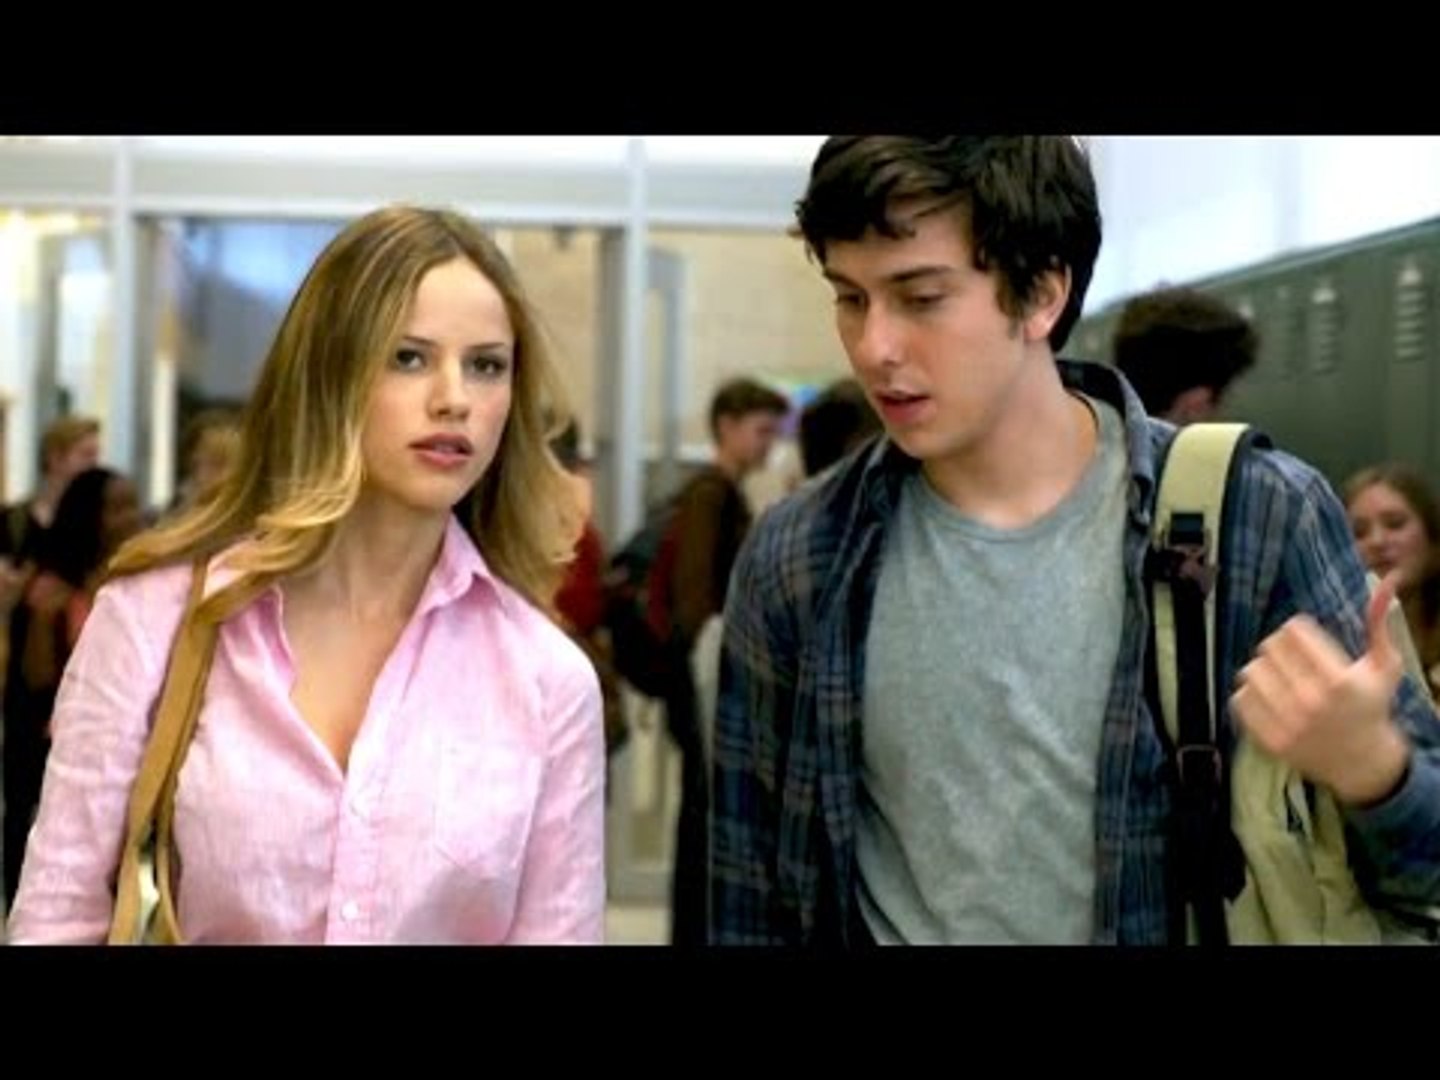 PAPER TOWNS Movie Trailer 2 (Cara Delevingne - 2015) - video Dailymotion